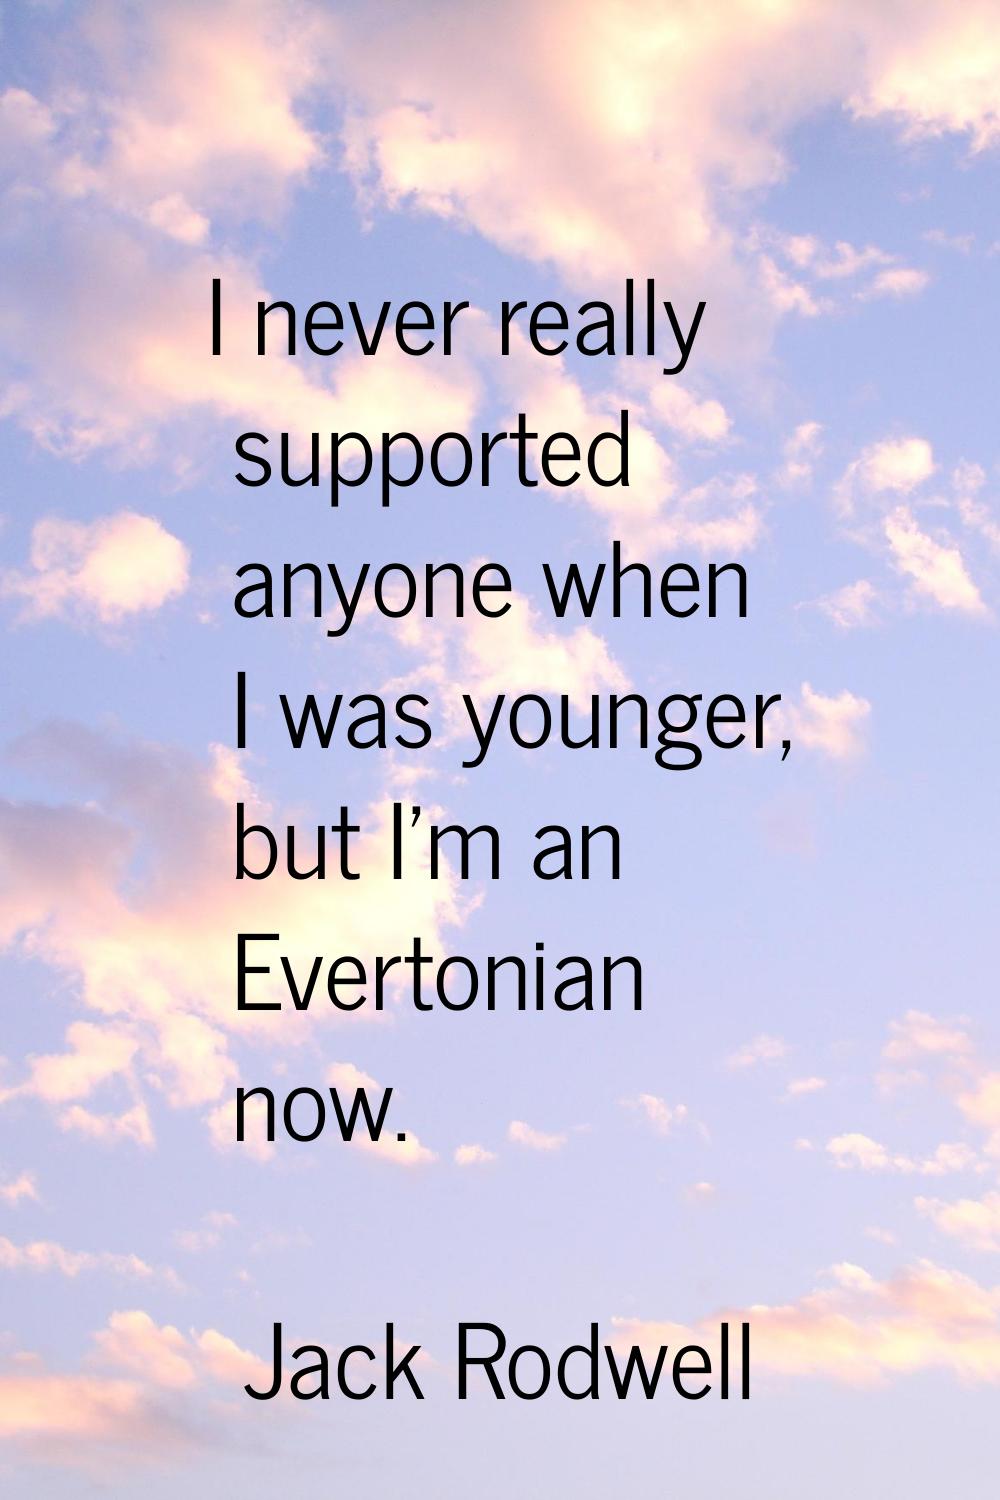 I never really supported anyone when I was younger, but I'm an Evertonian now.